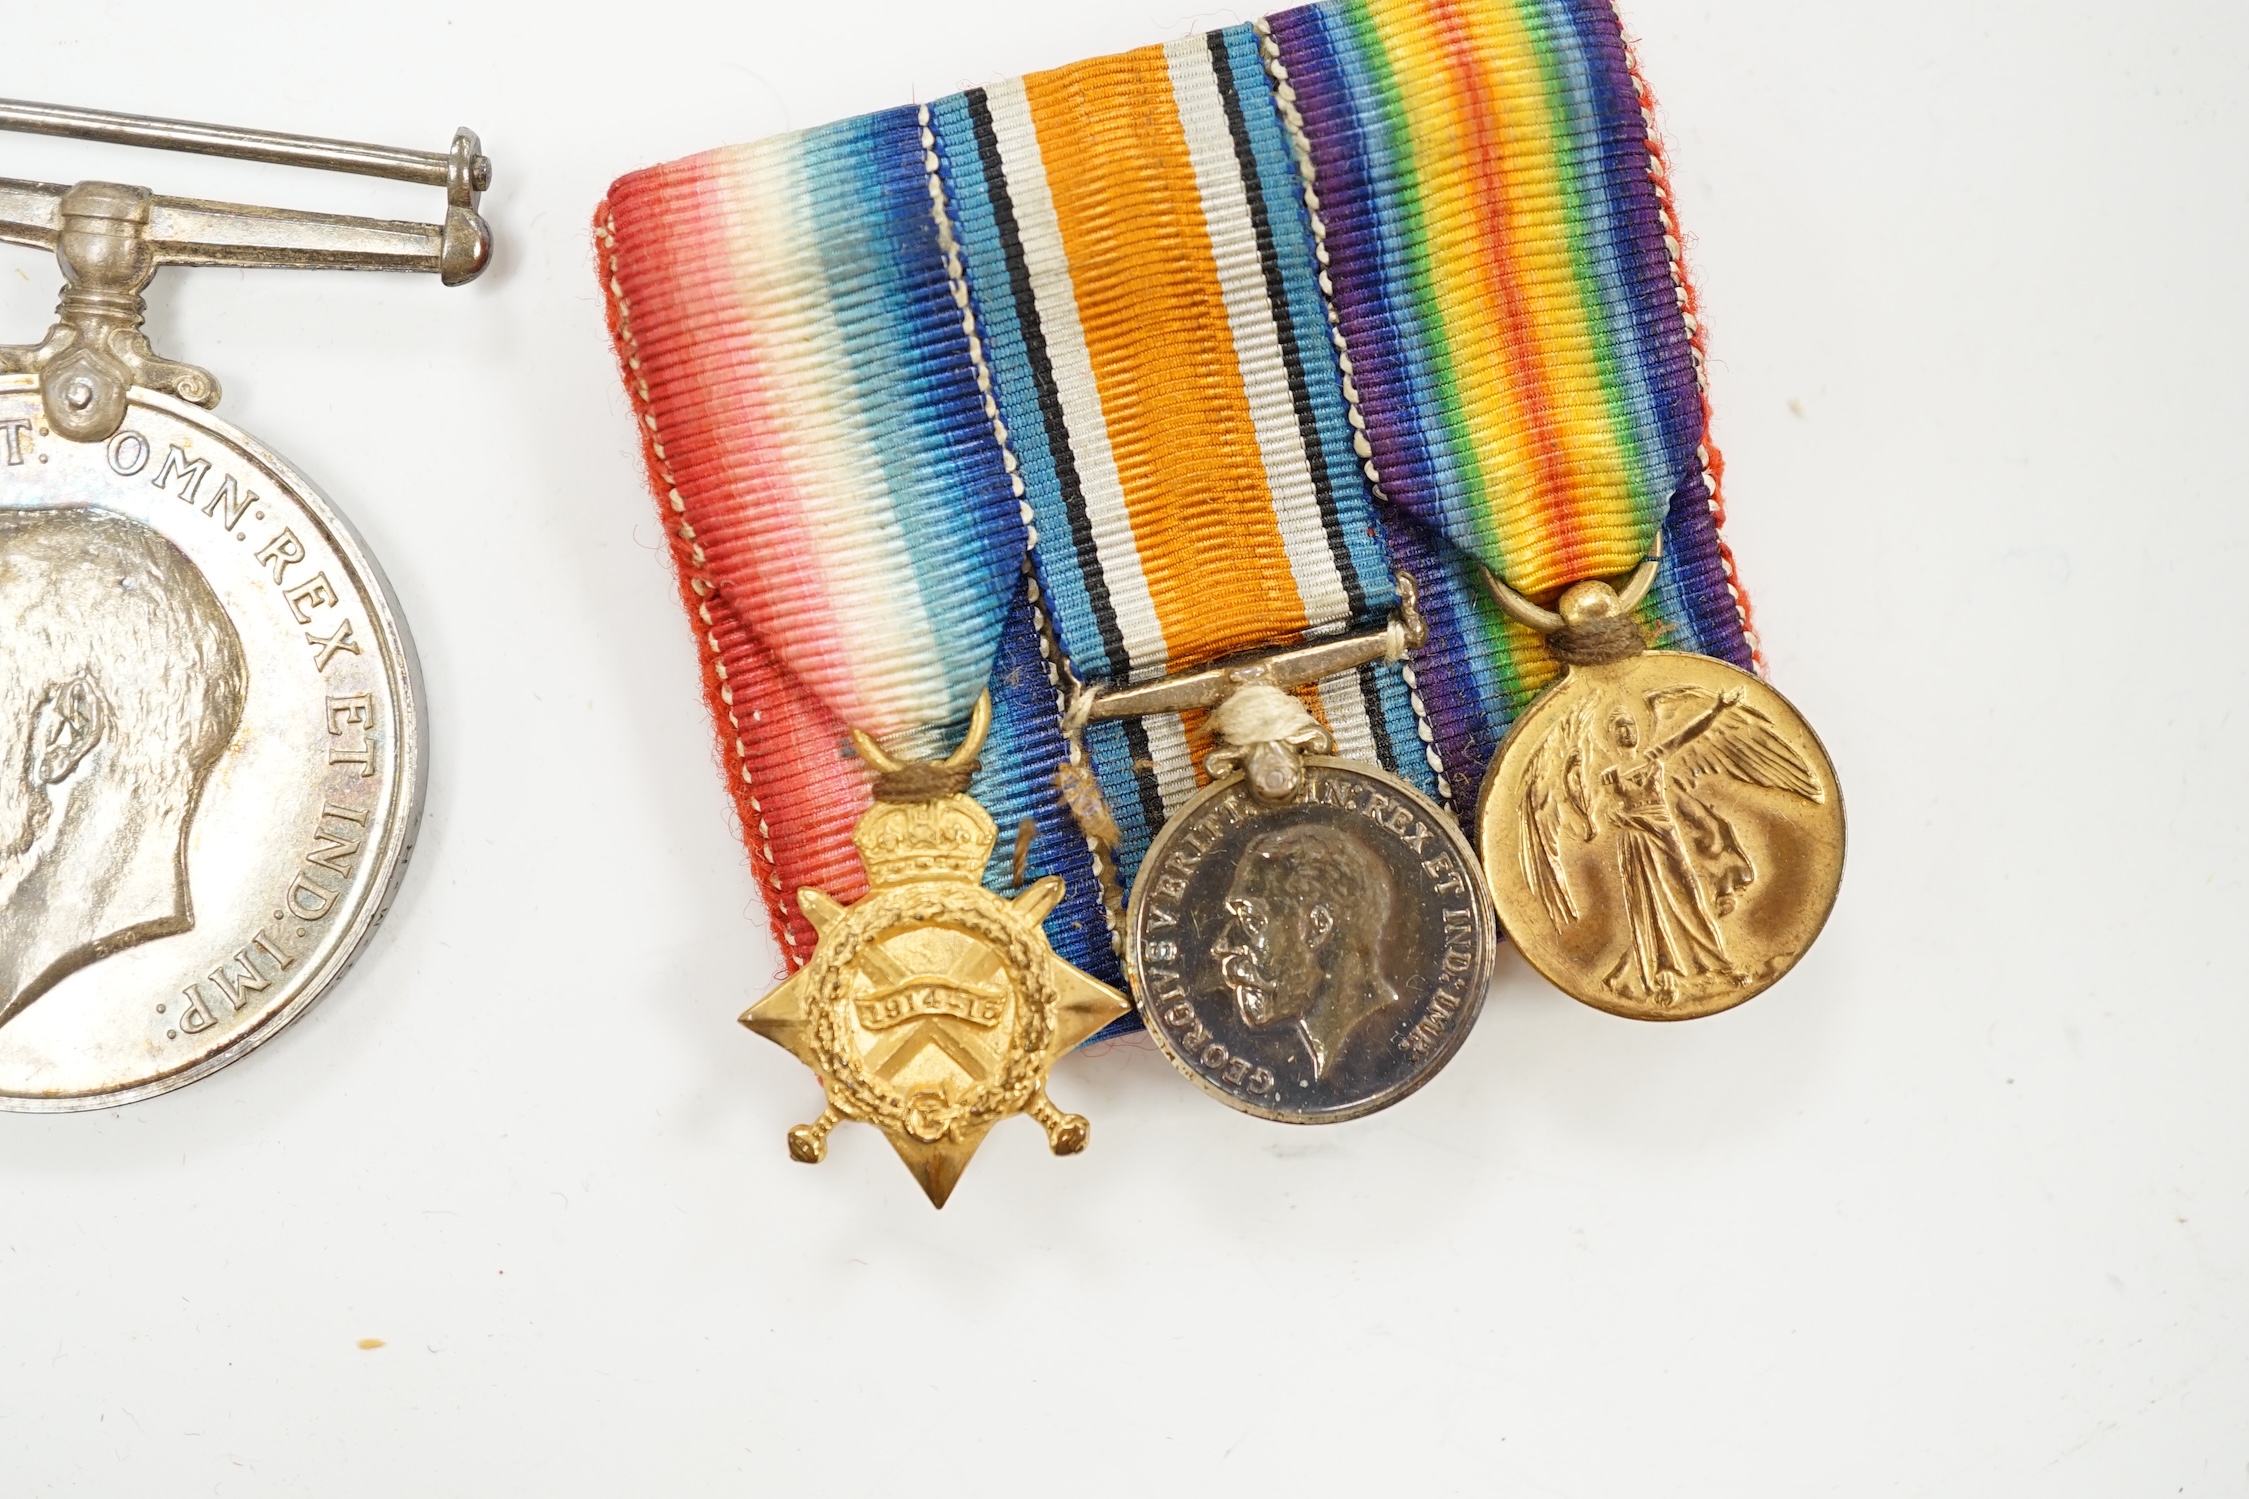 A First World War medal trio awarded to Pte. R.N. Randell, Canadian Forces, together with the miniature set, original card box of issue, the original envelope, paperwork and War Office issued folder. Condition - fair to